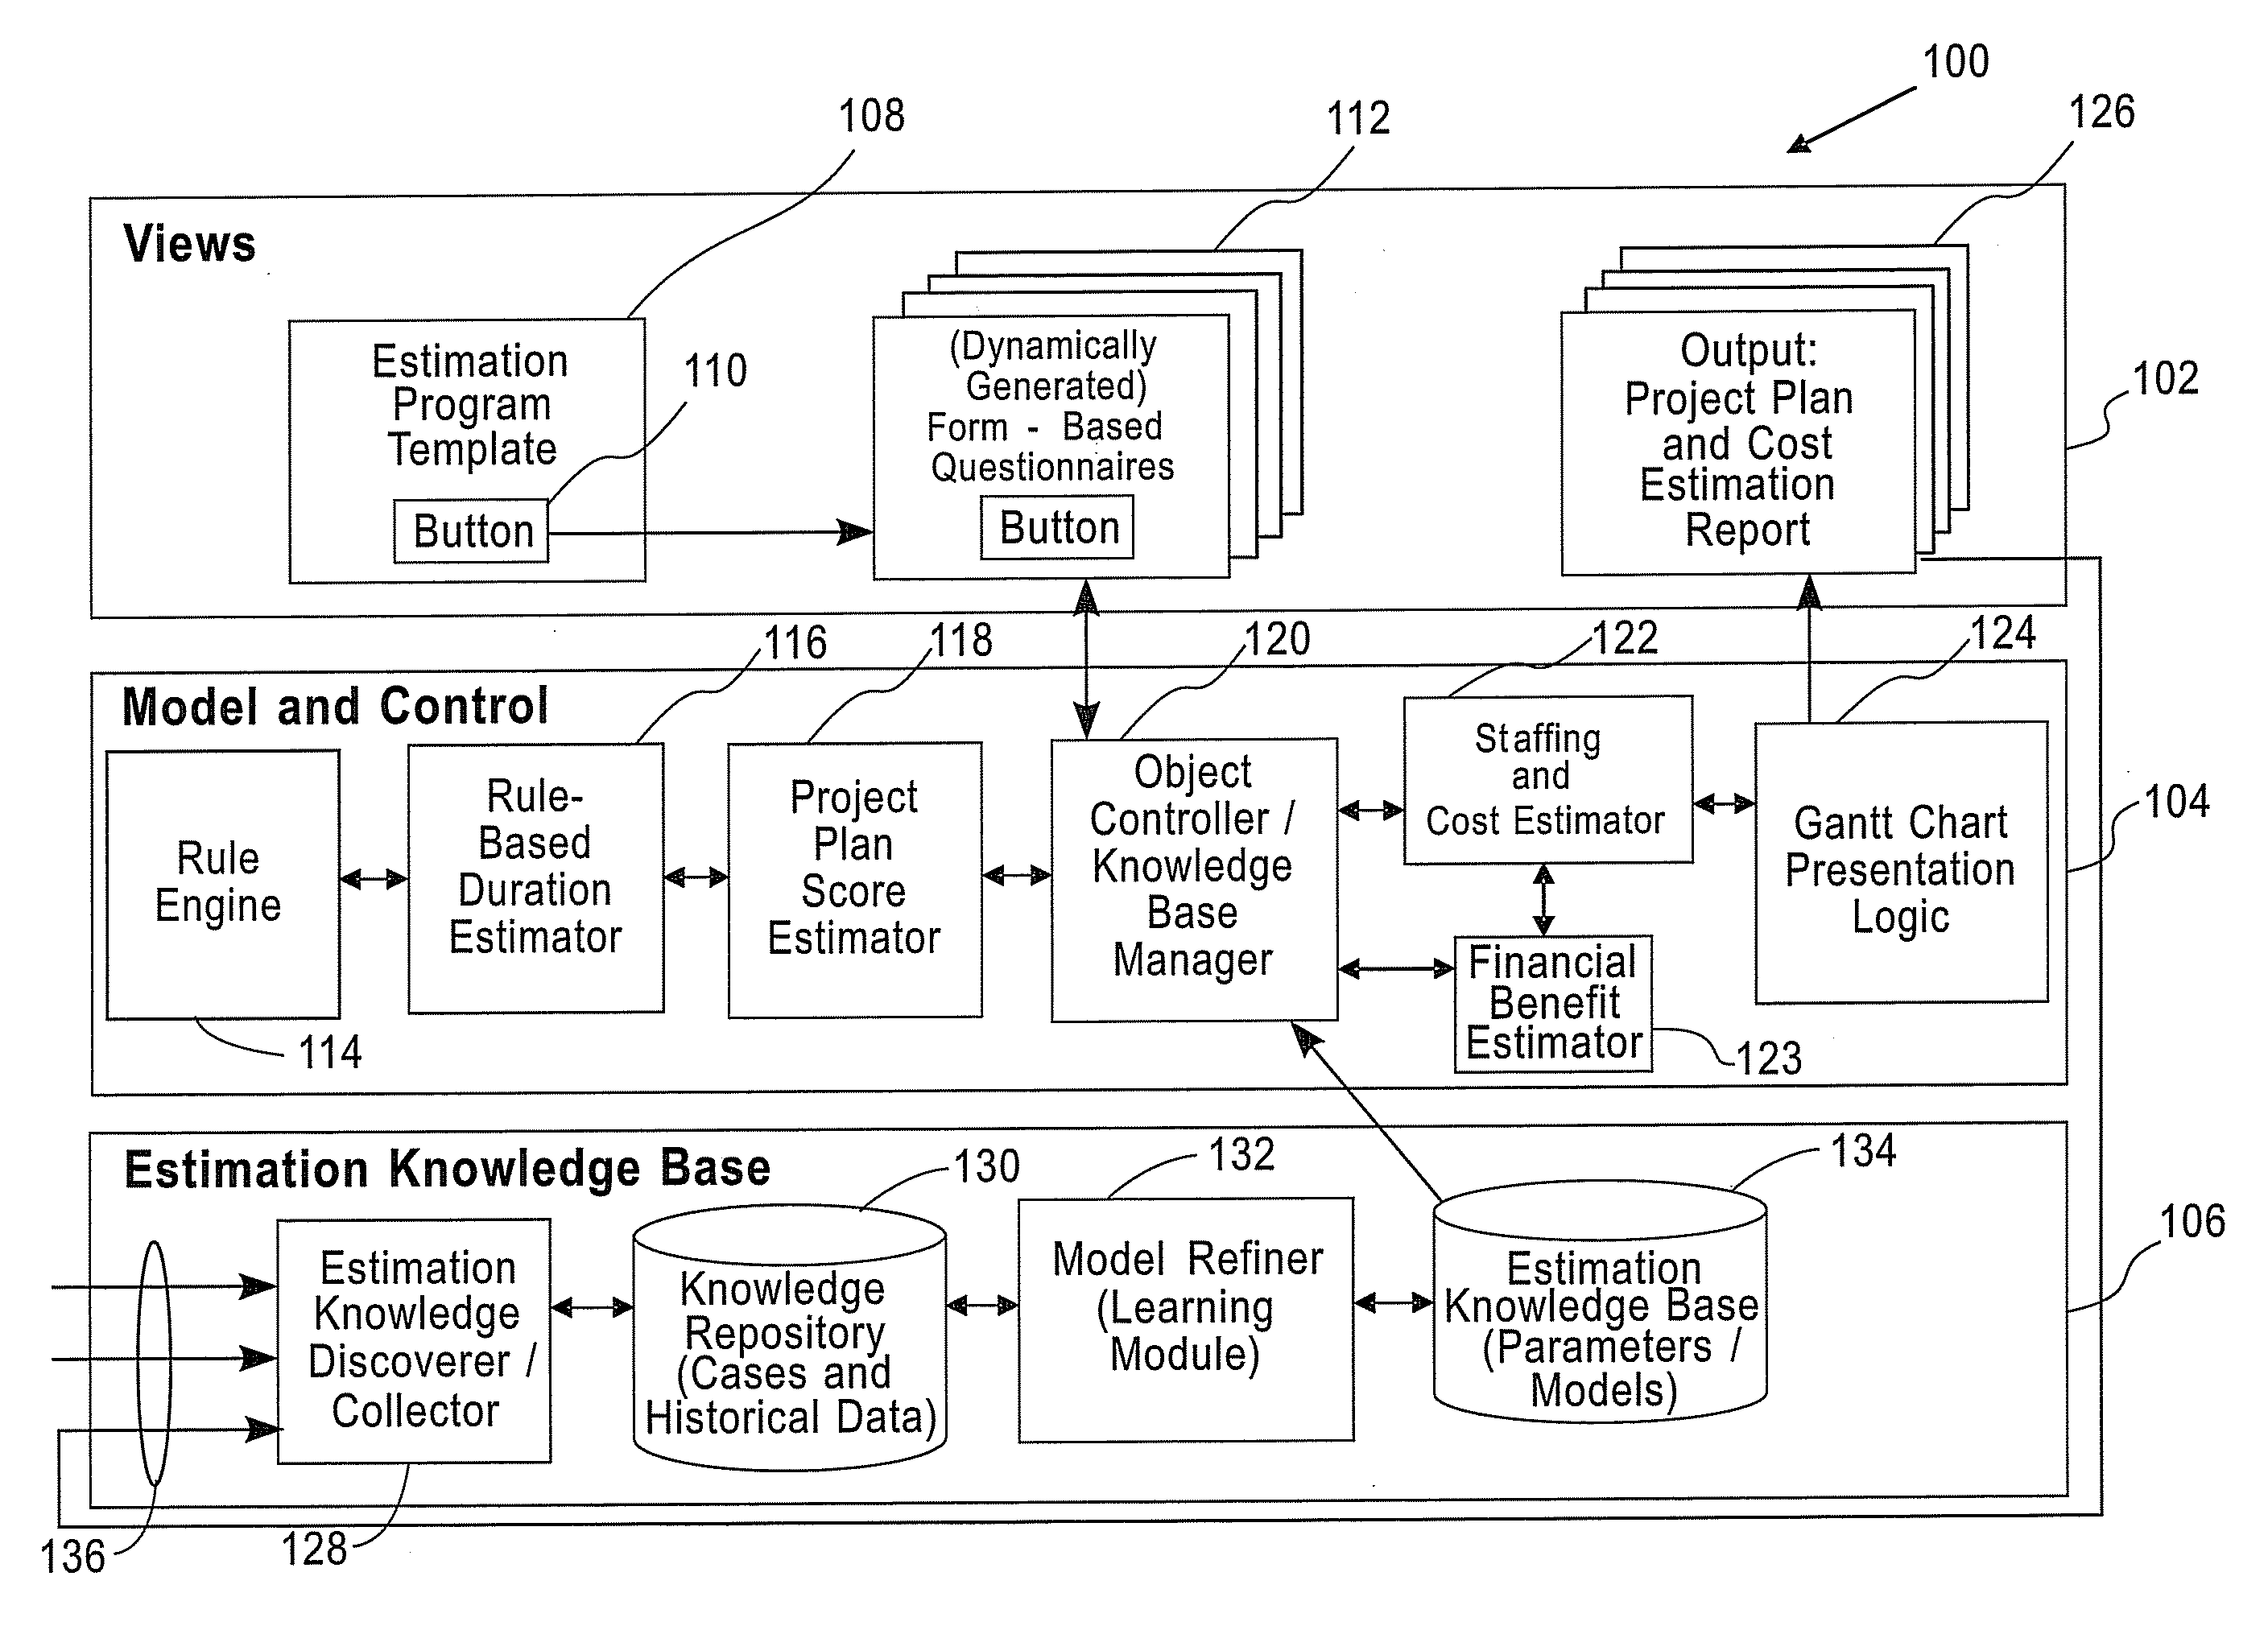 Method and system for self-calibrating project estimation models for packaged software applications